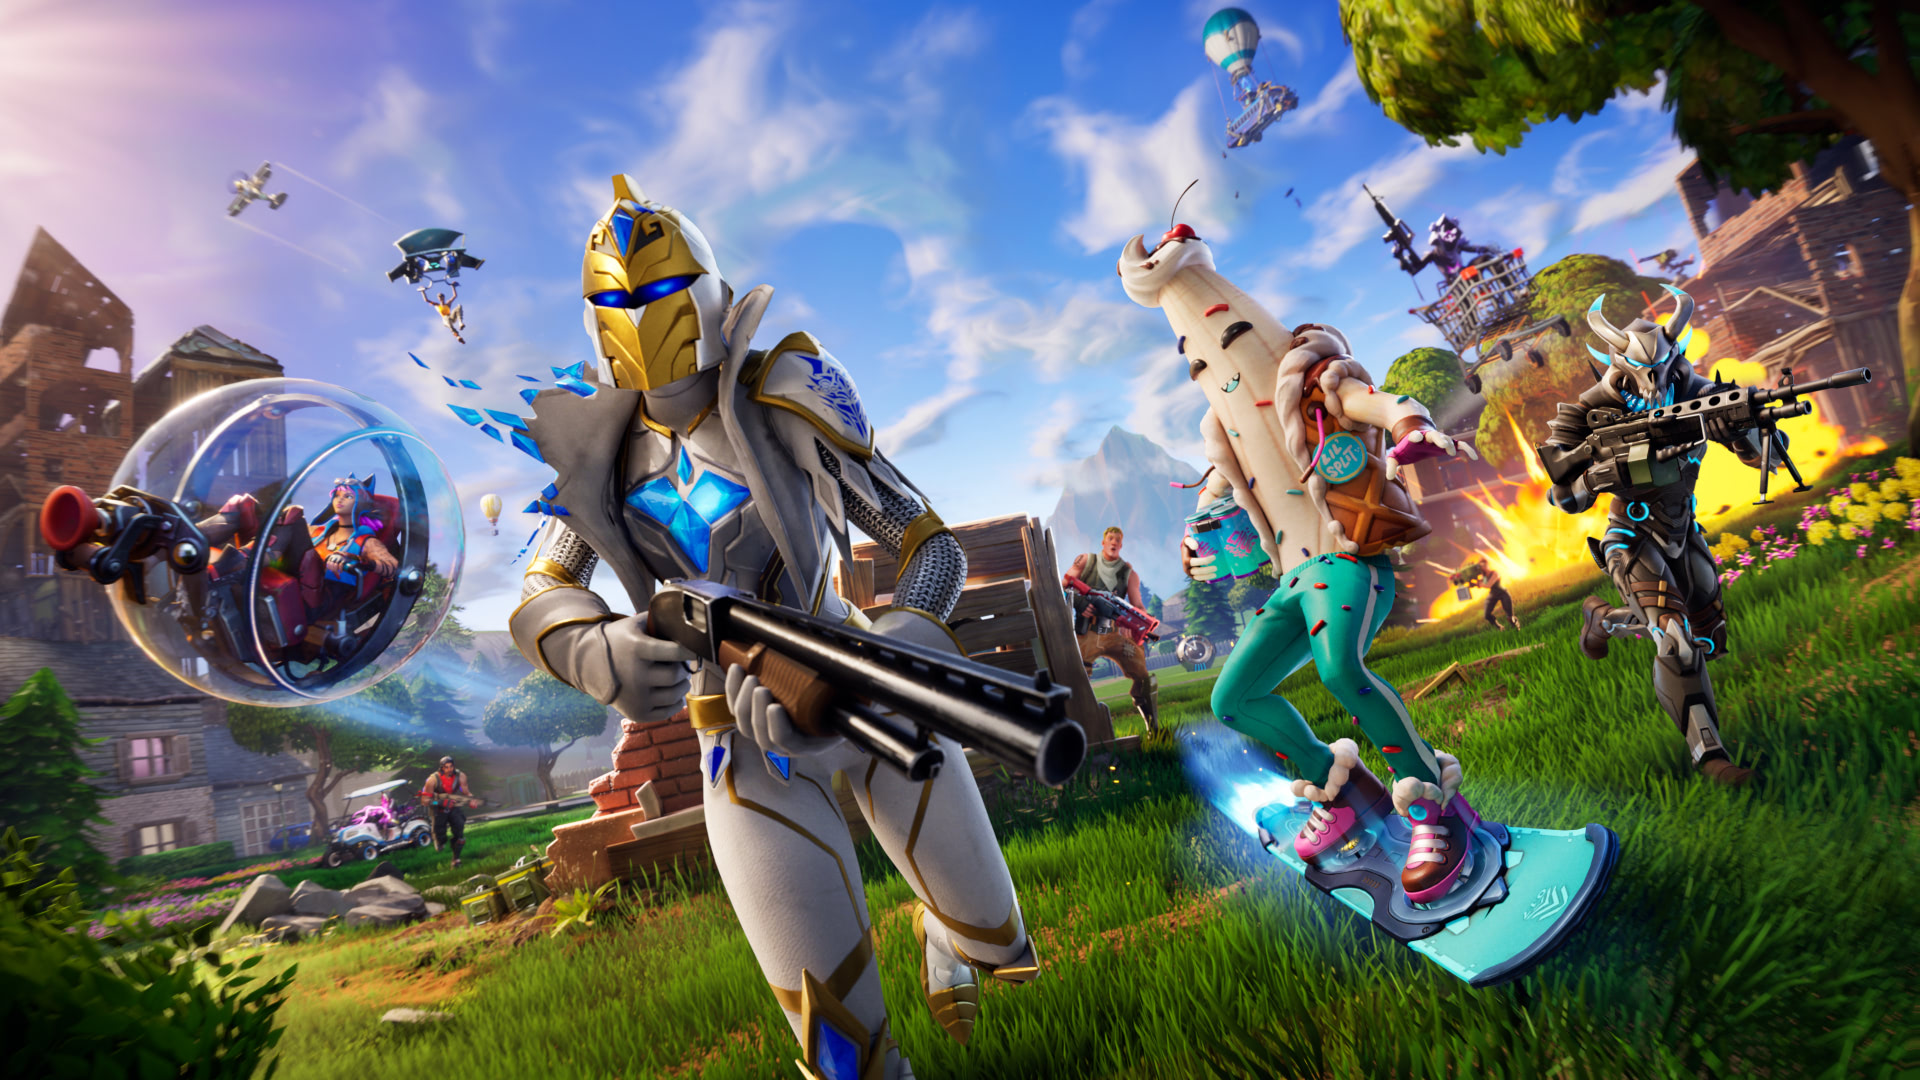 Fortnite's Controversial Cosmetics Ban Explained: What Skins Are Banned?